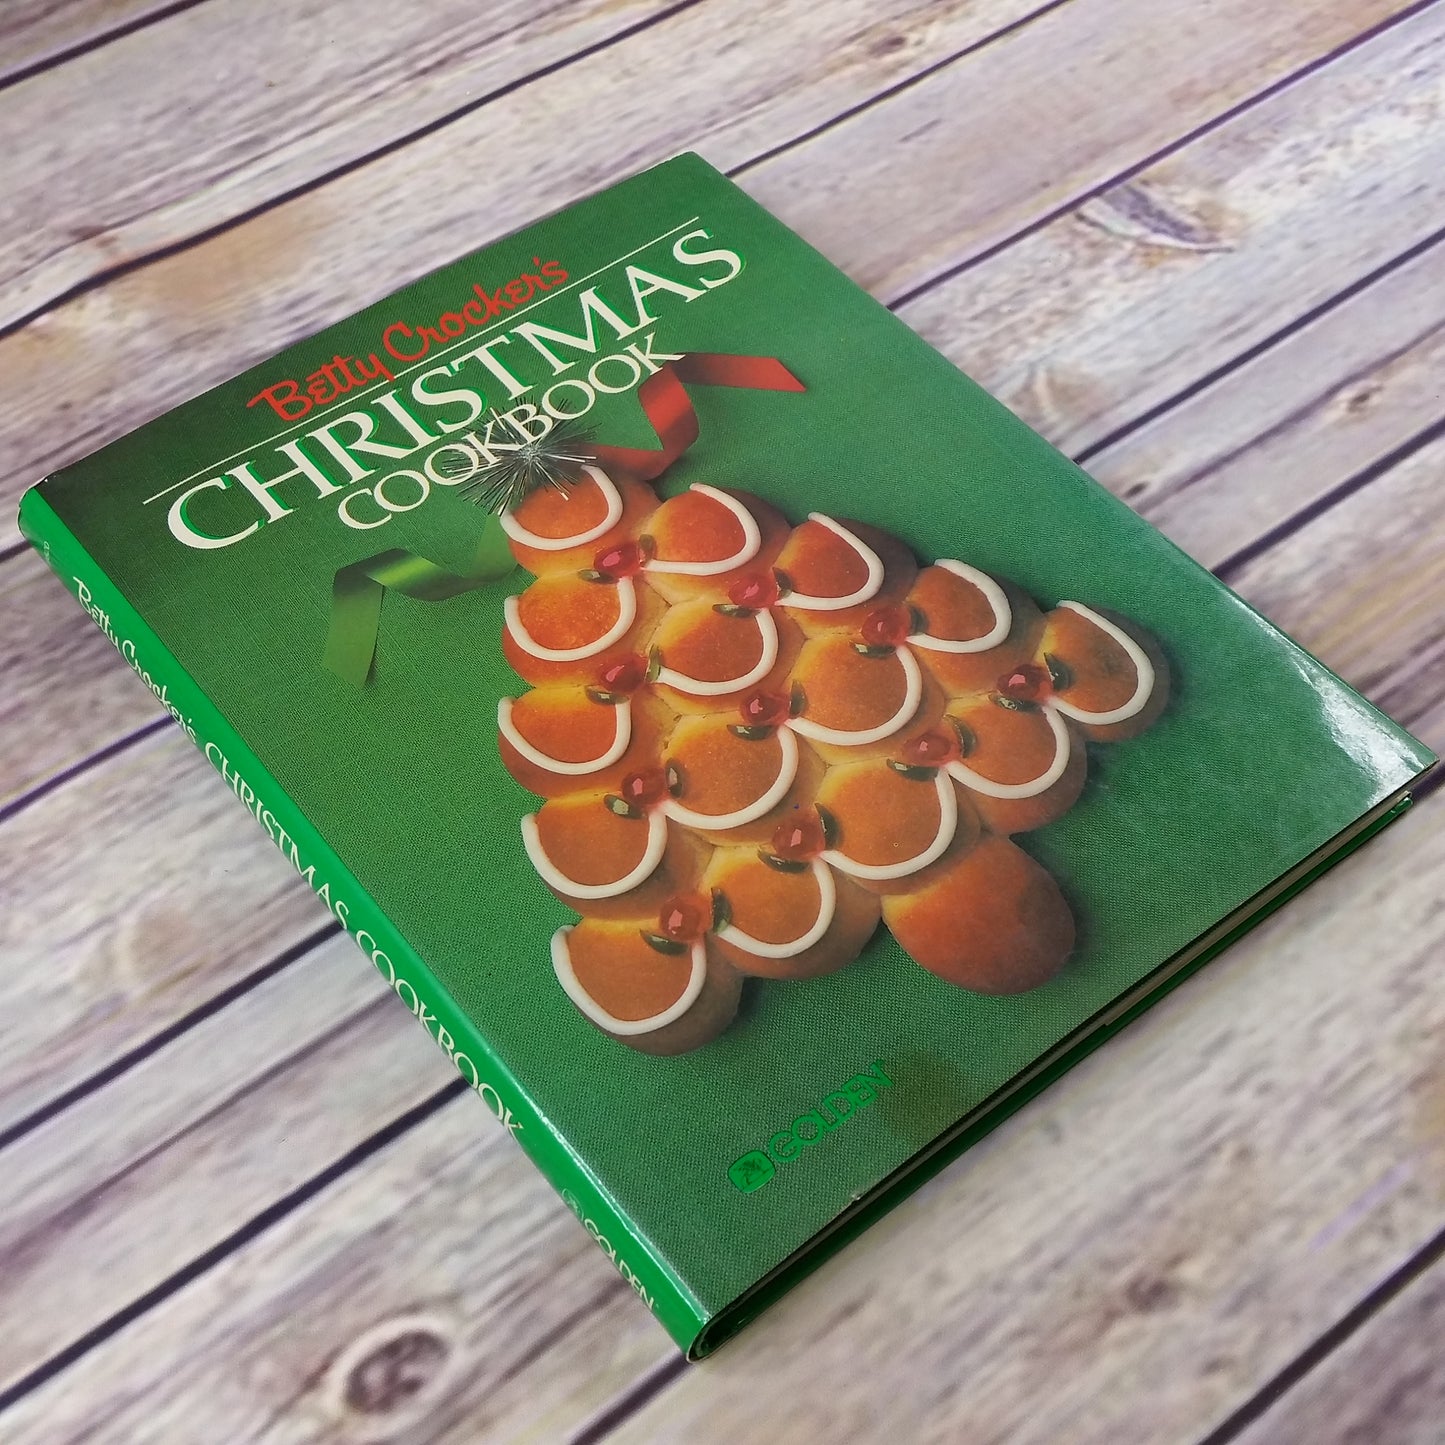 Vintage Cookbook Betty Crockers Christmas 1982 Hardcover with Dust Jacket Cookies Desserts Christmas Day Dinners - At Grandma's Table